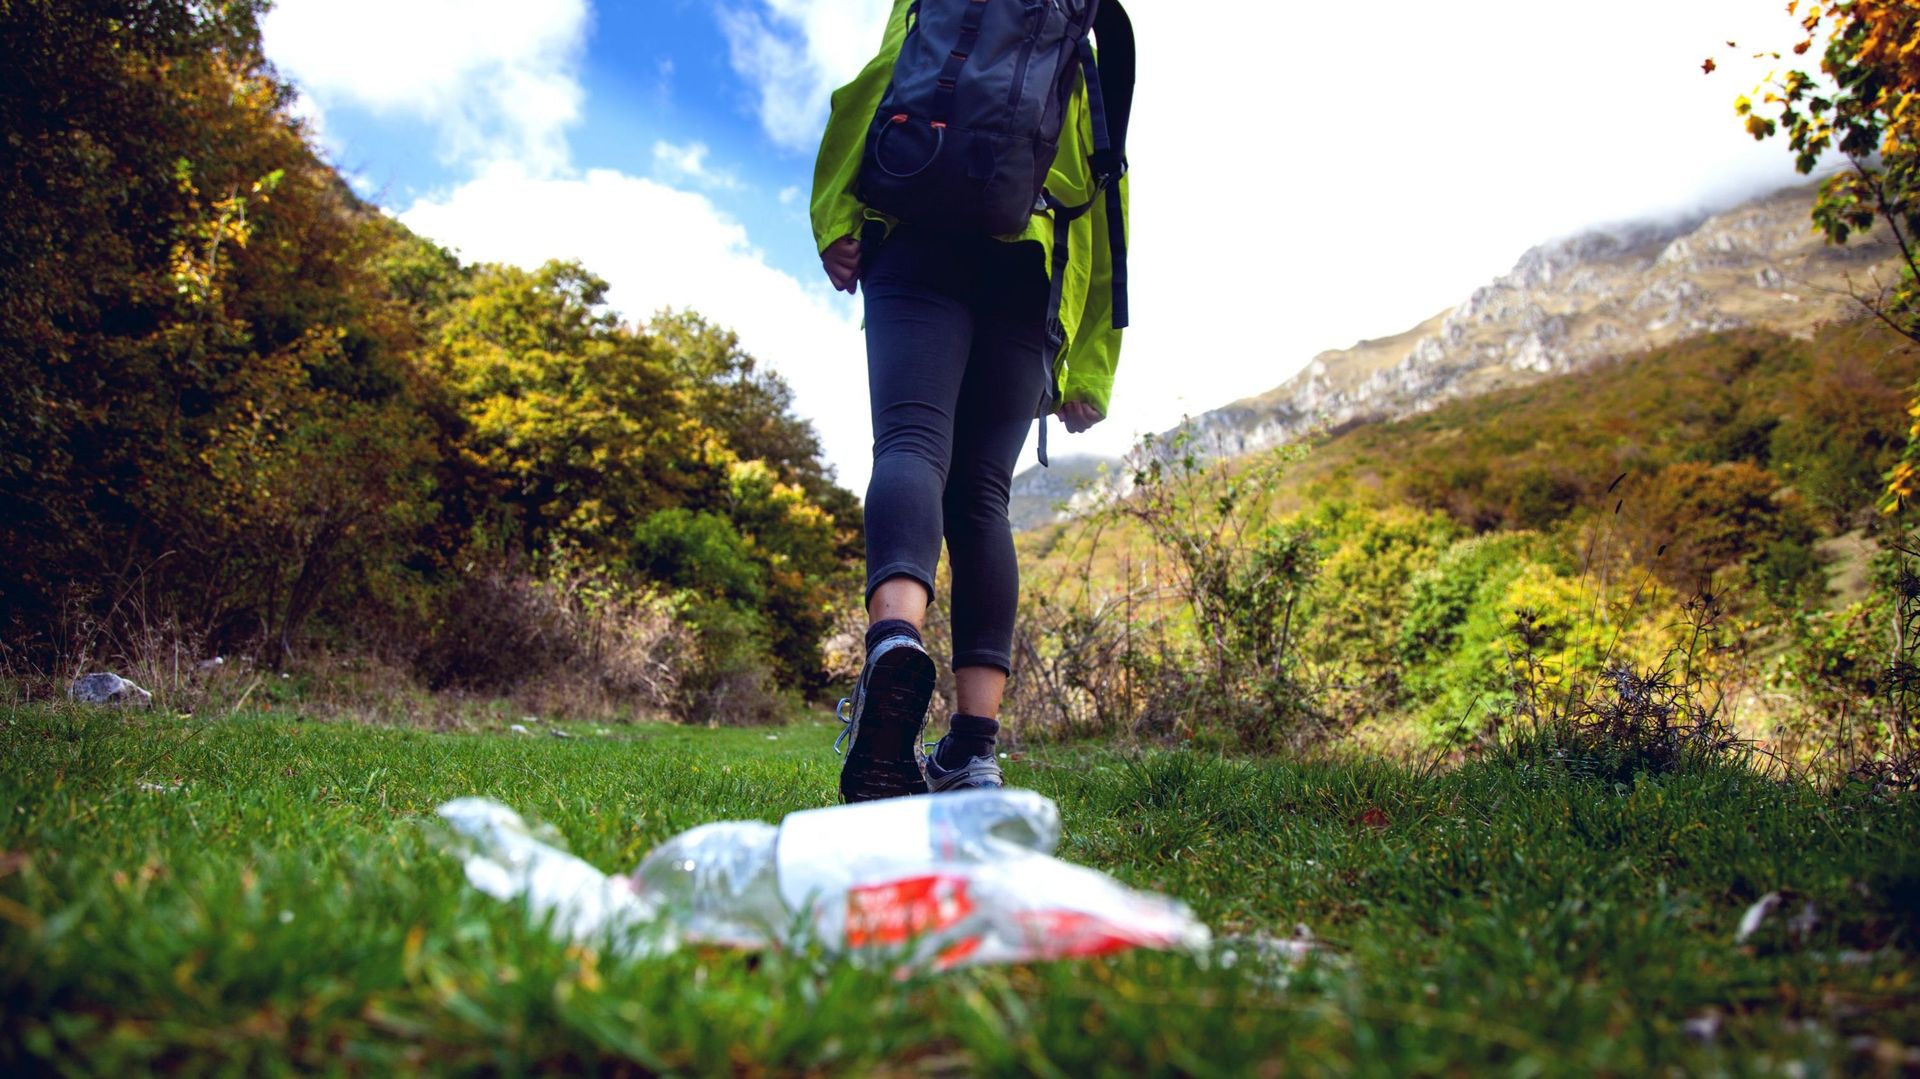 Careless climbers in mountain trashing water bottle on the grass